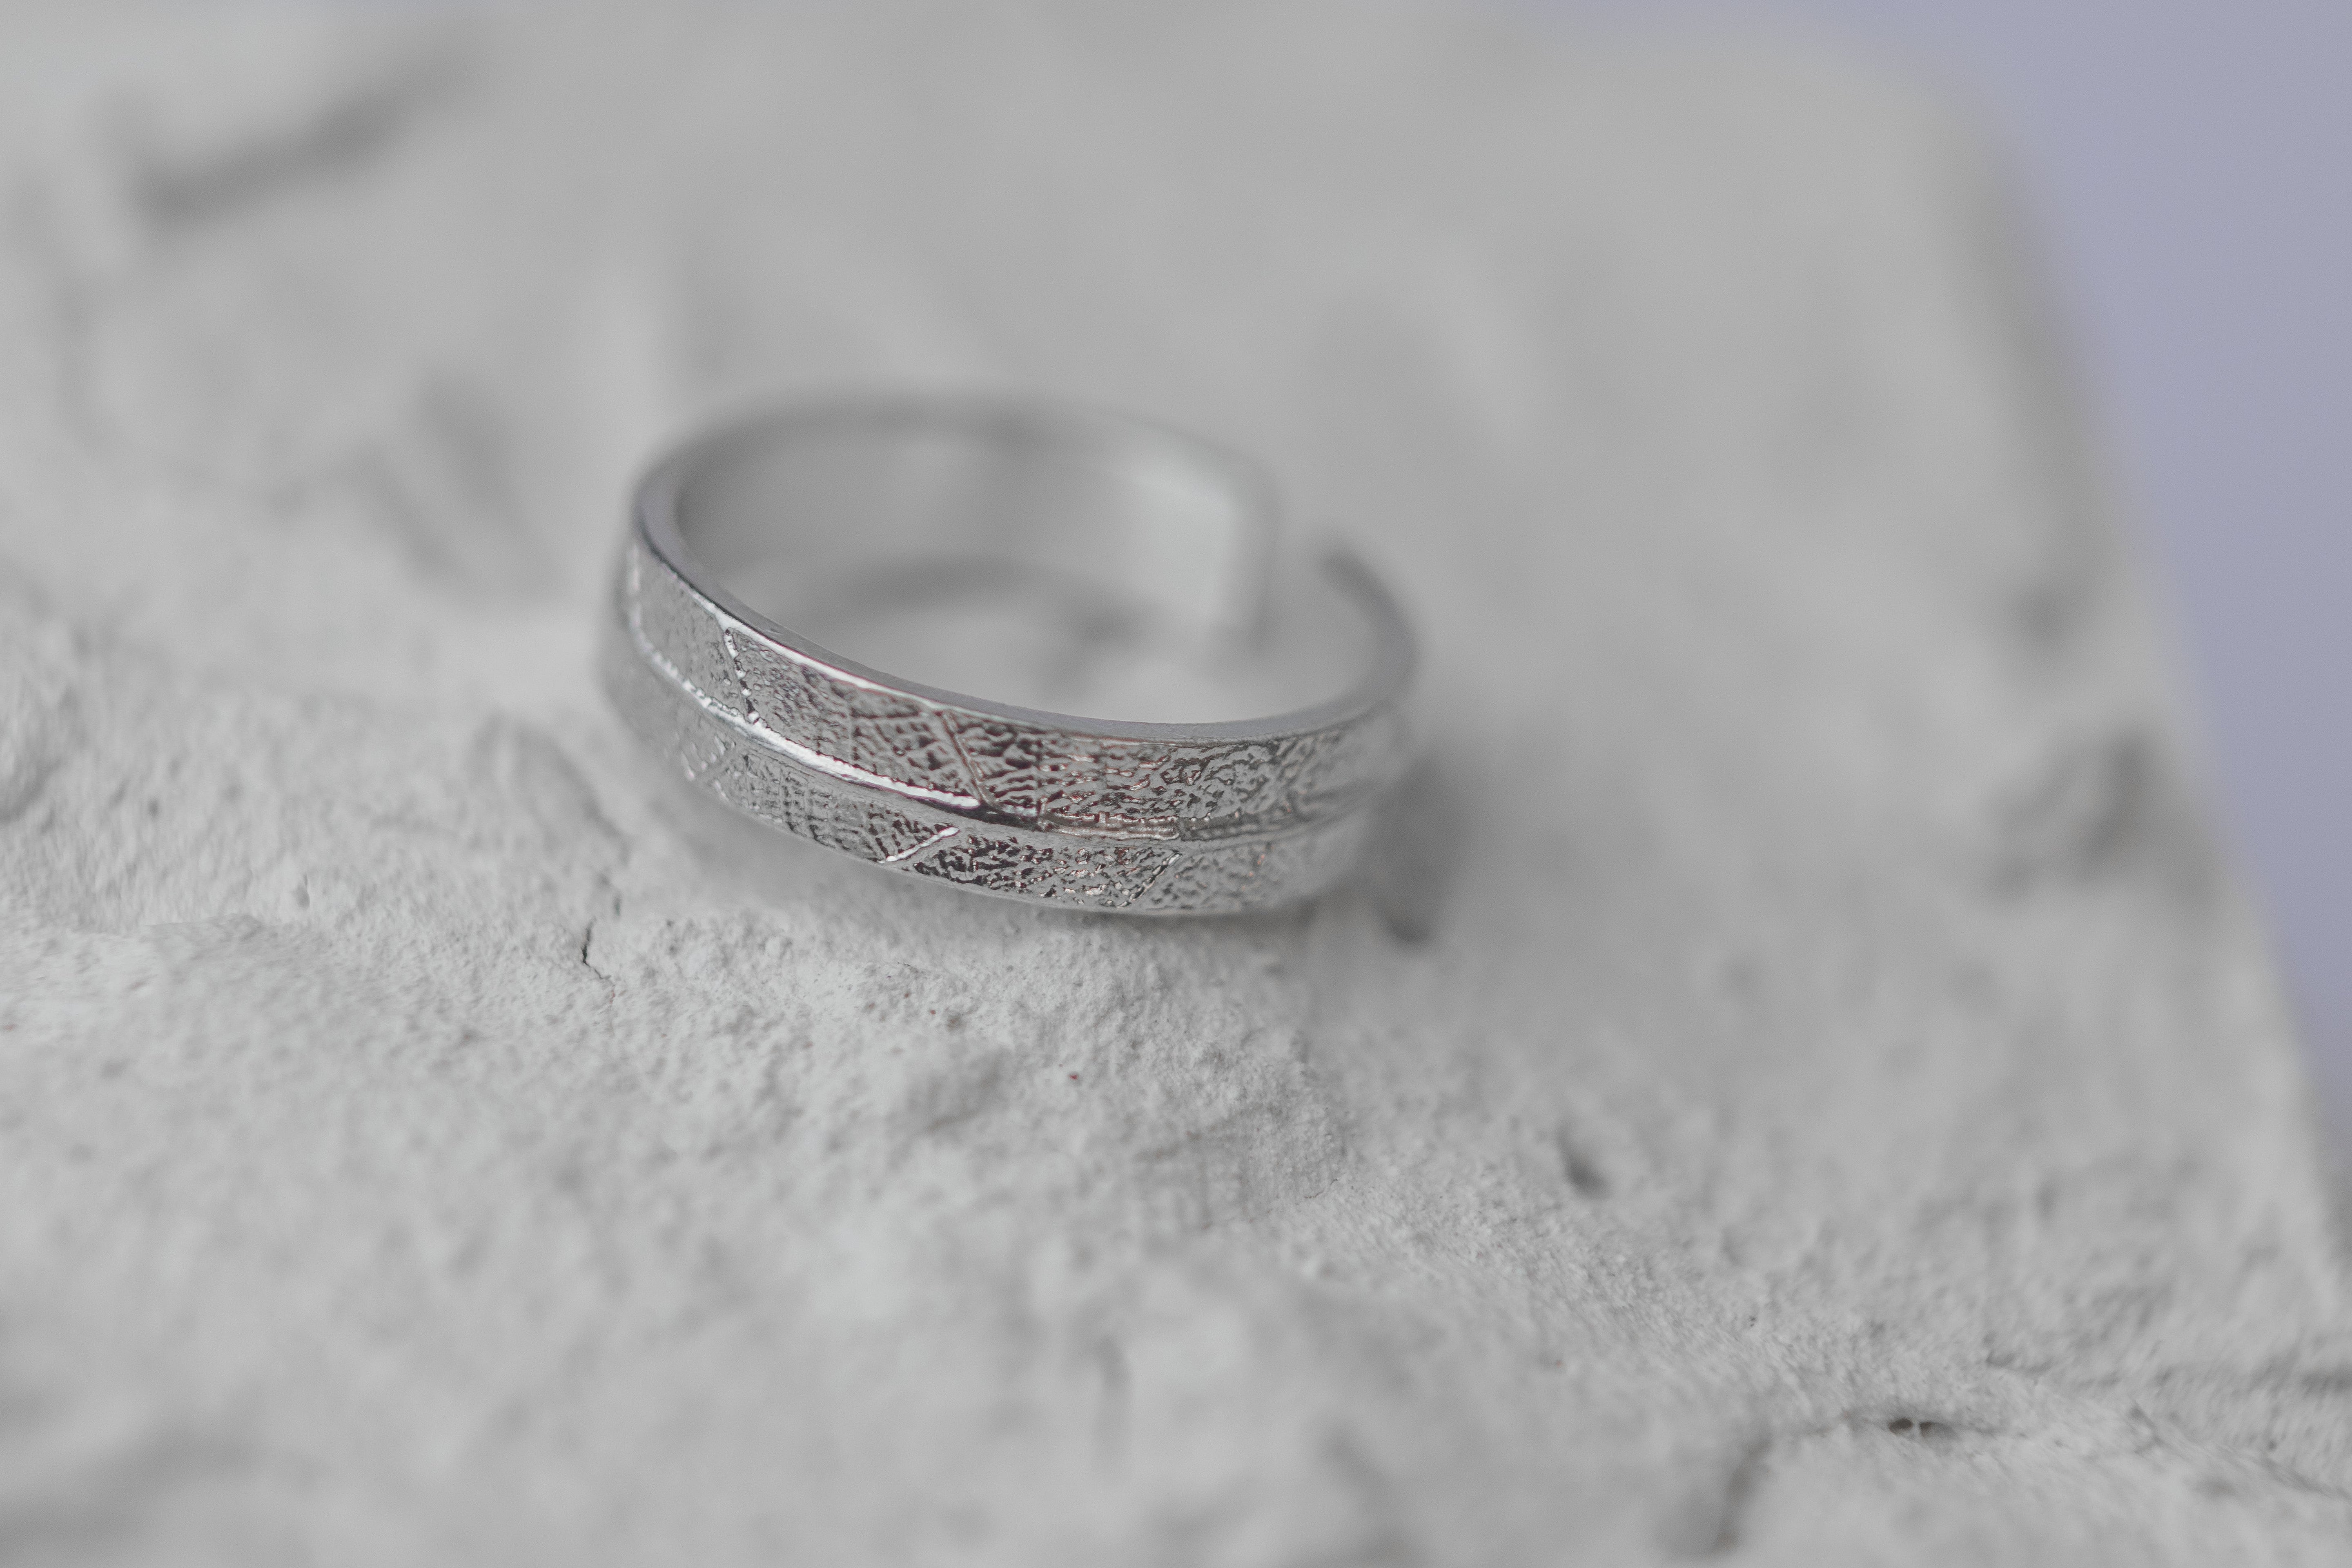 Adjustable ring with leaf relief